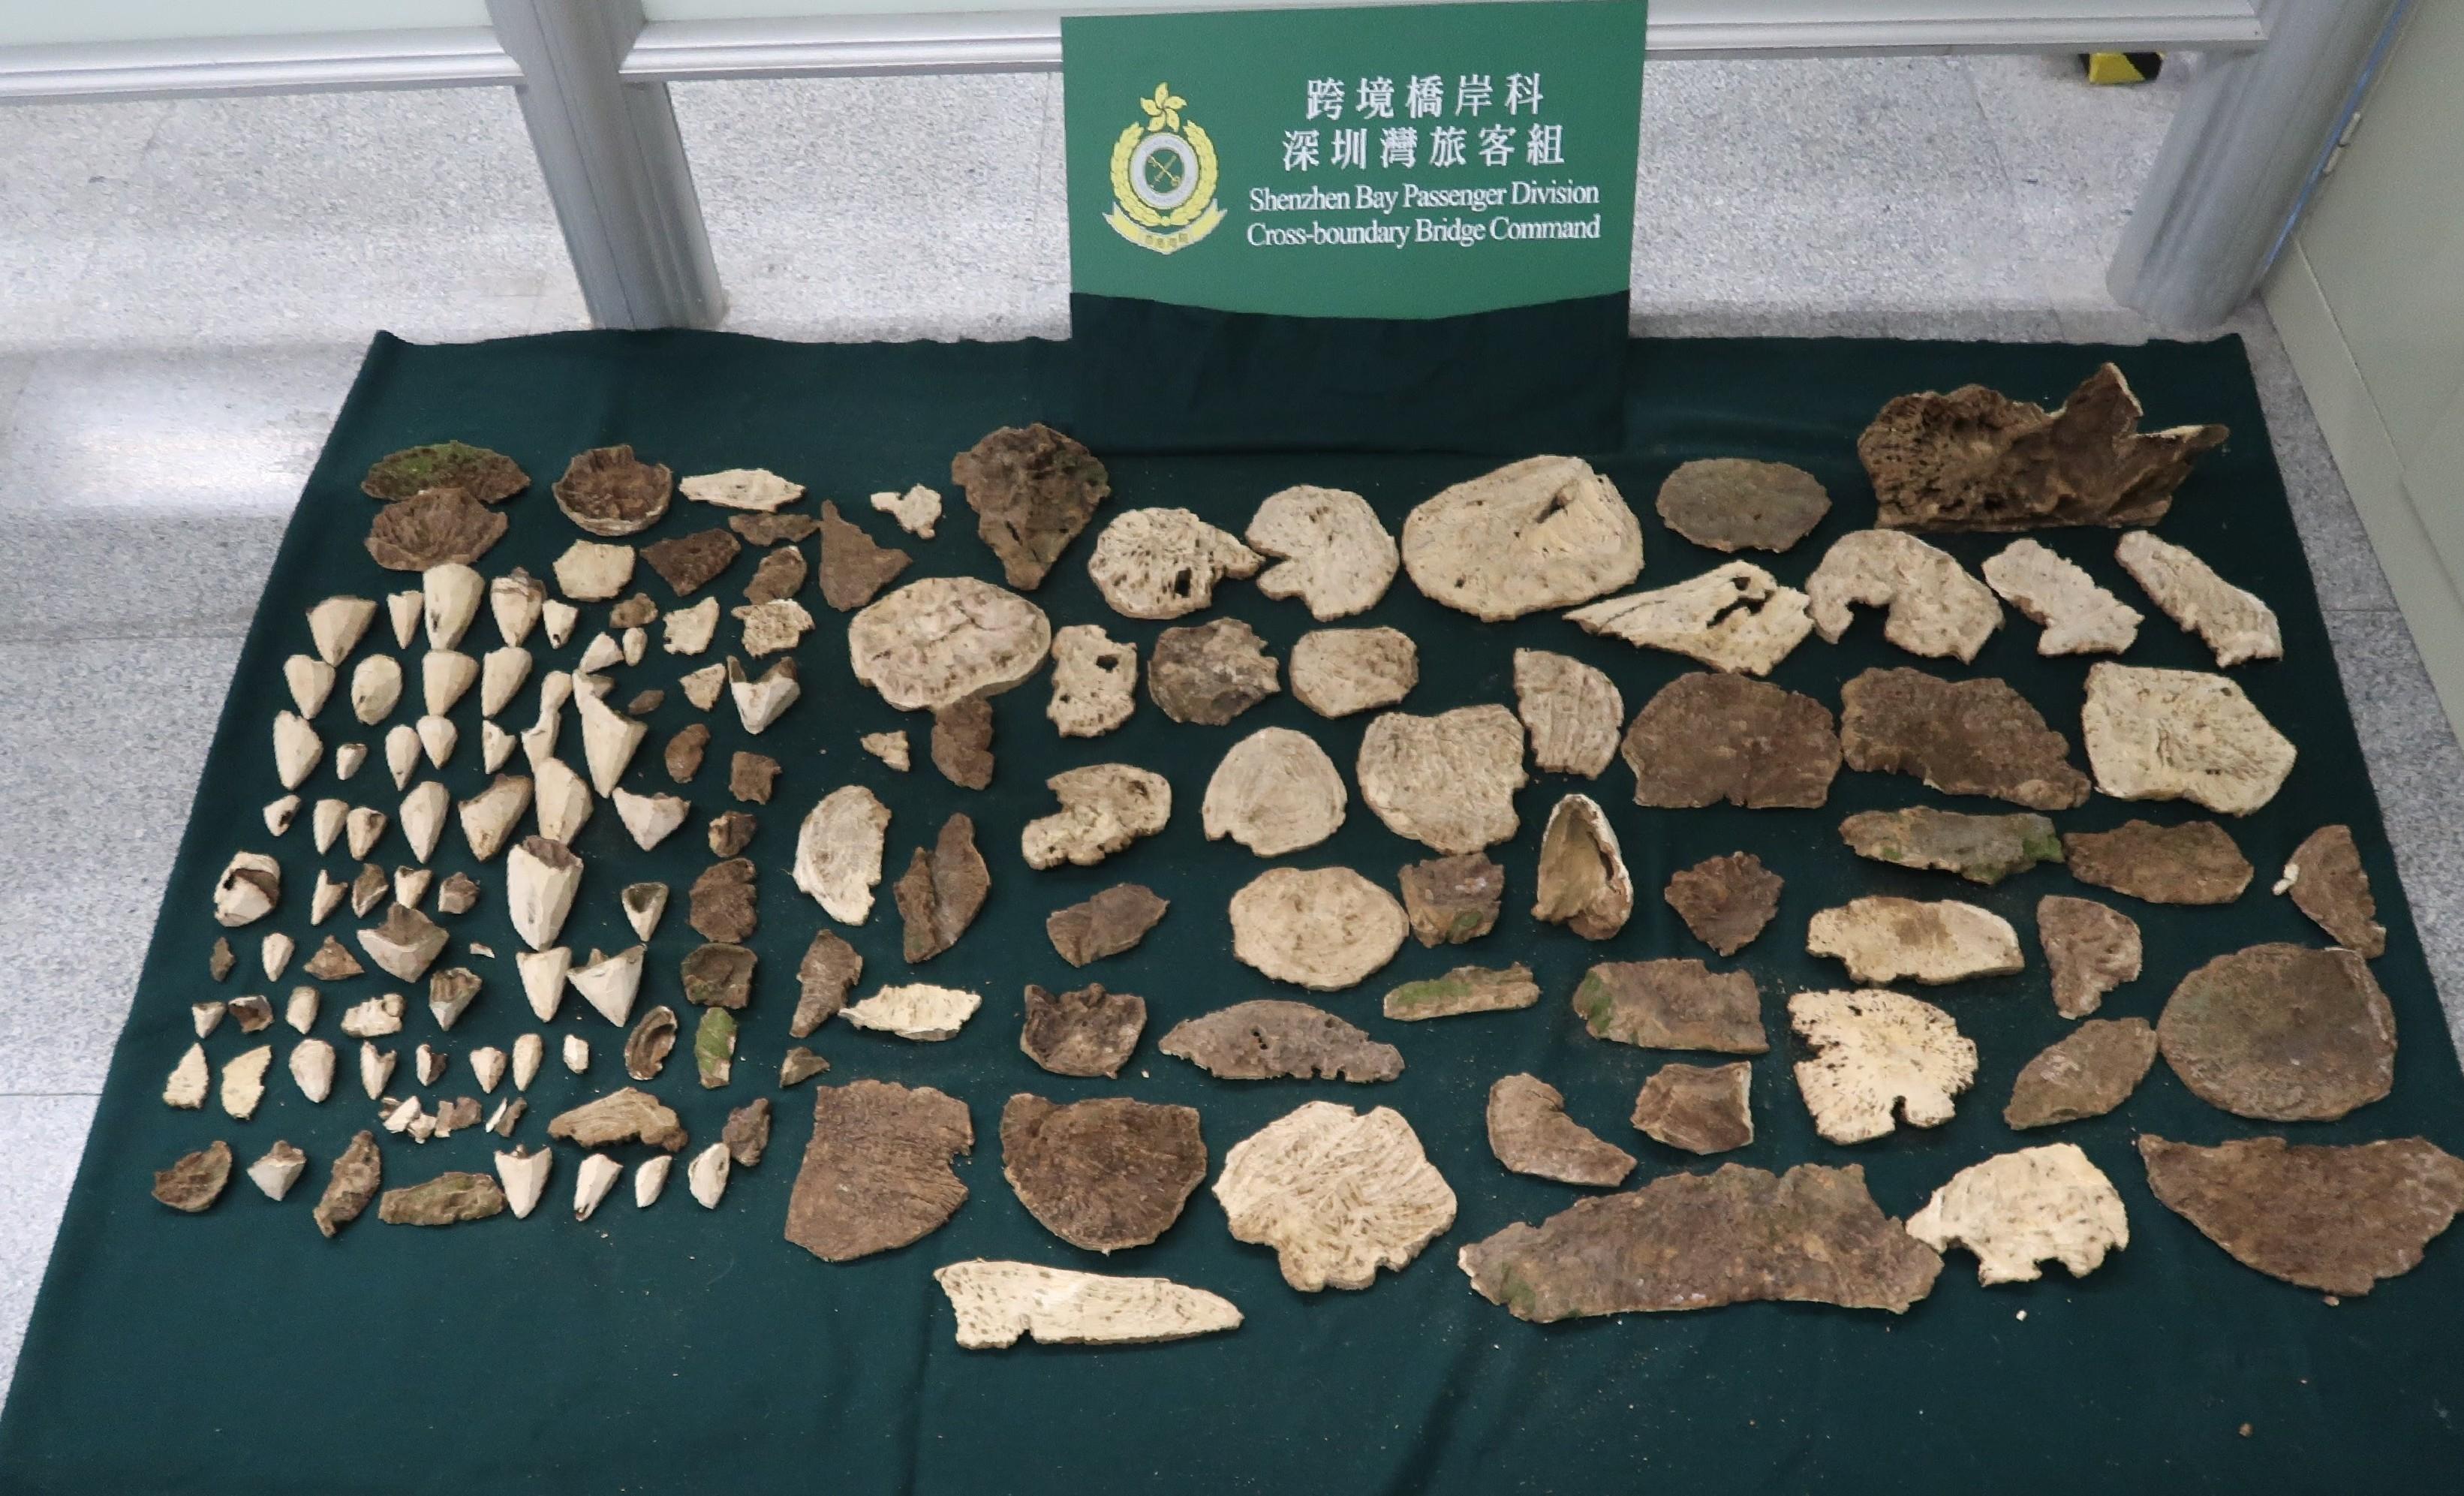 Hong Kong Customs detected two smuggling cases of suspected scheduled agarwood involving outbound passengers at the Shenzhen Bay Control Point, and seized a total of about 13.2 kilograms of suspected scheduled agarwood with an estimated market value of about $1.06 million over the past two days (March 12 and 13). Photo shows the suspected scheduled agarwood, with a total weight of about 9 kg, seized by Customs officers on March 13.